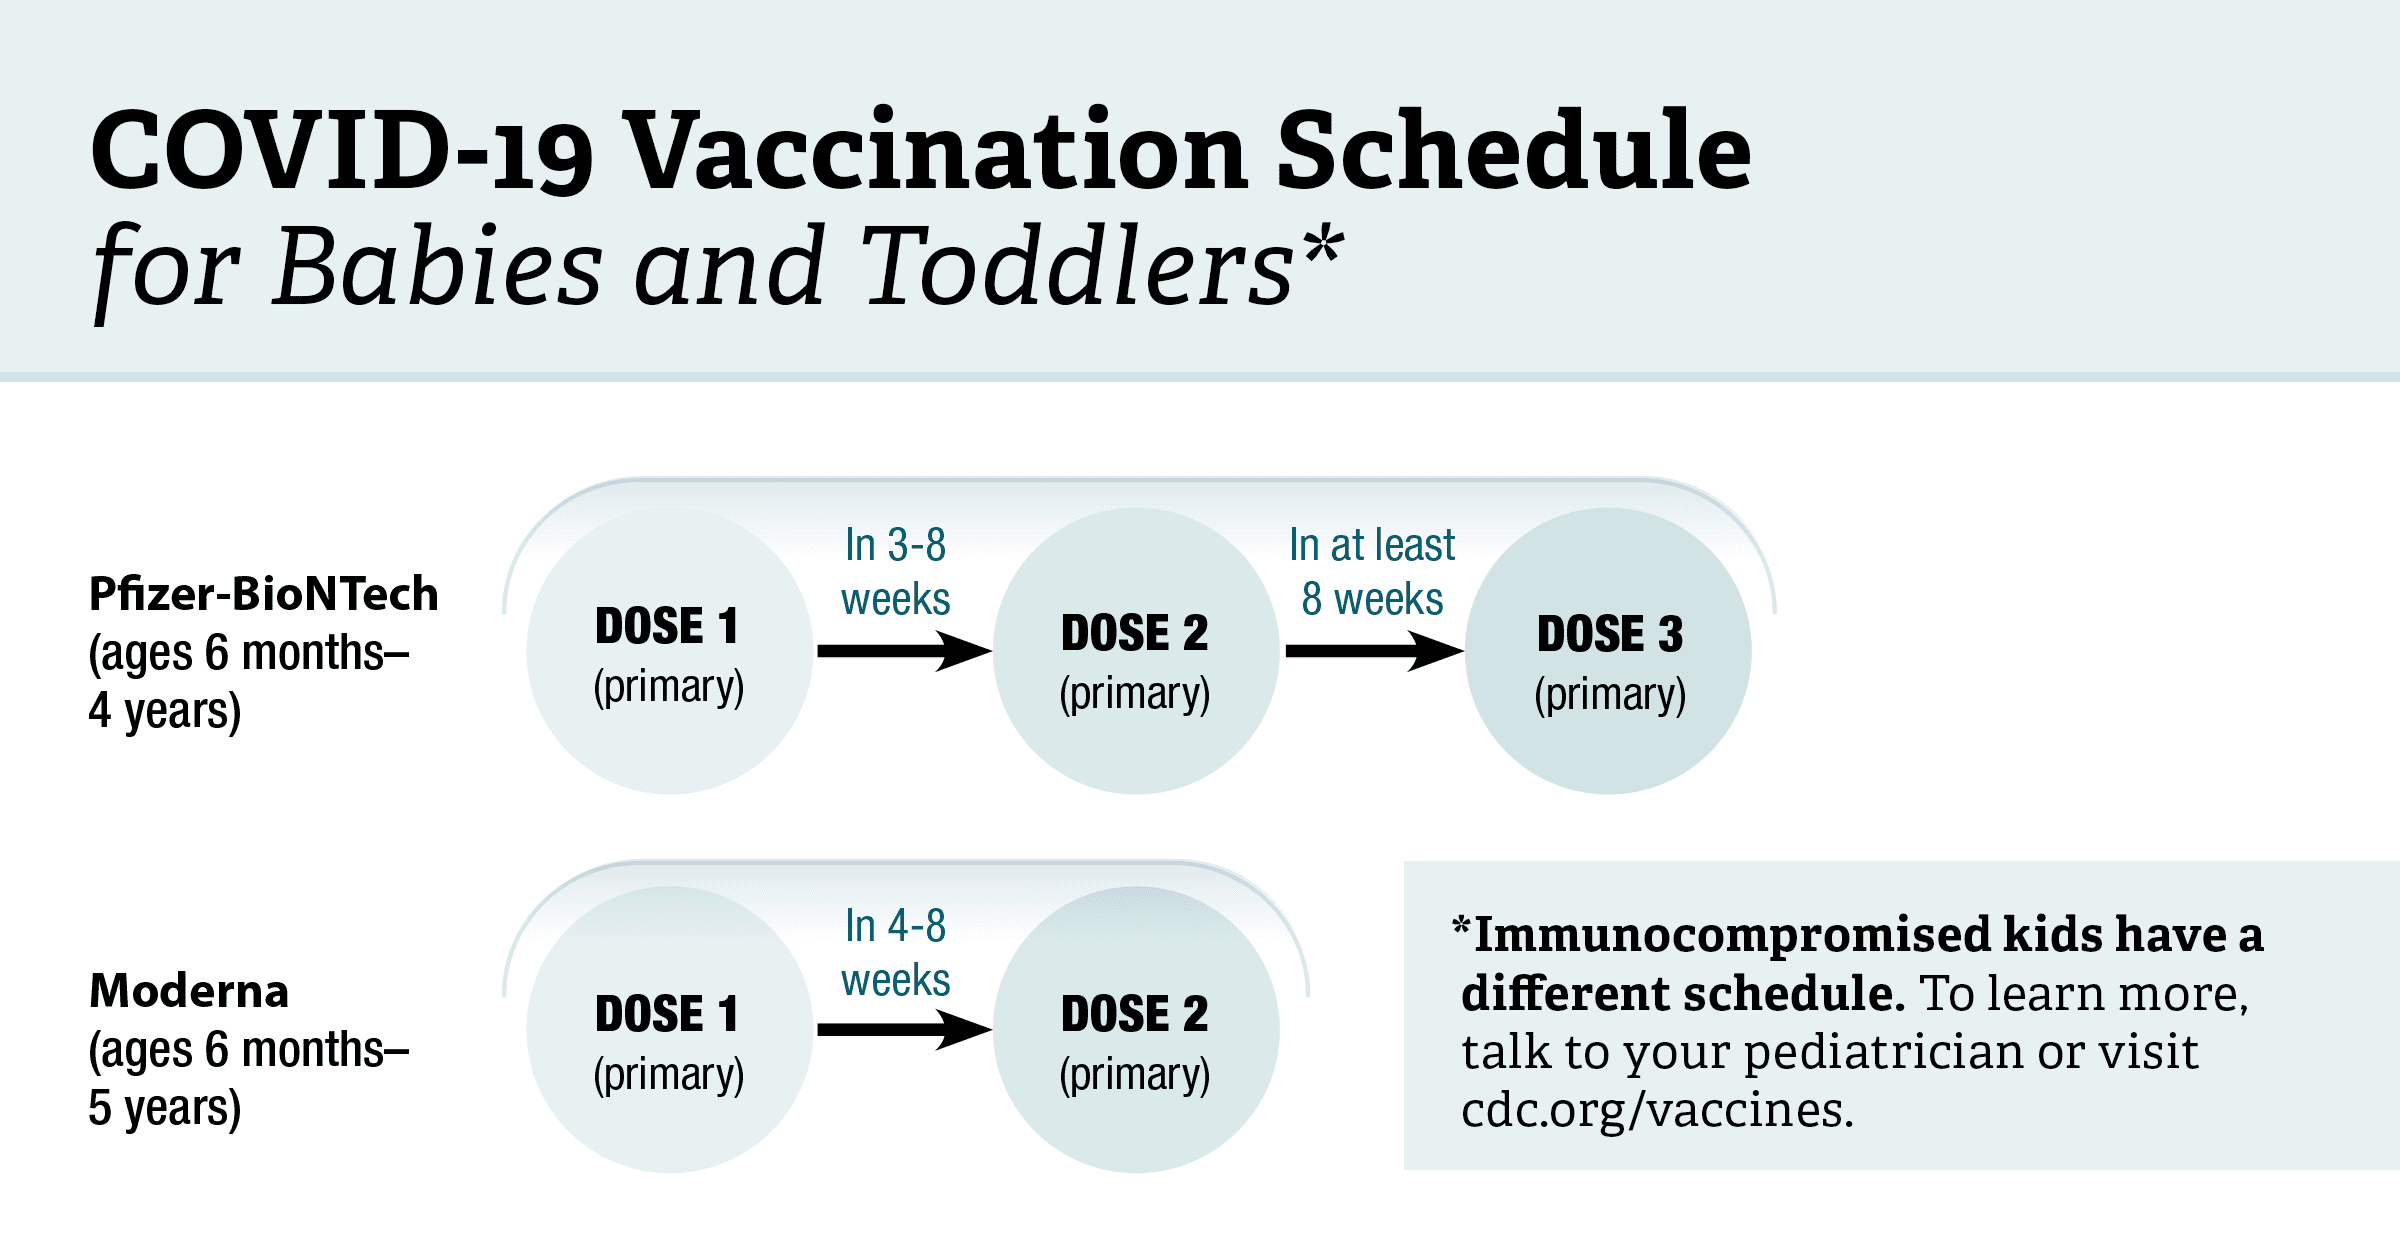 COVID-19 vaccination schedule for babies and toddlers